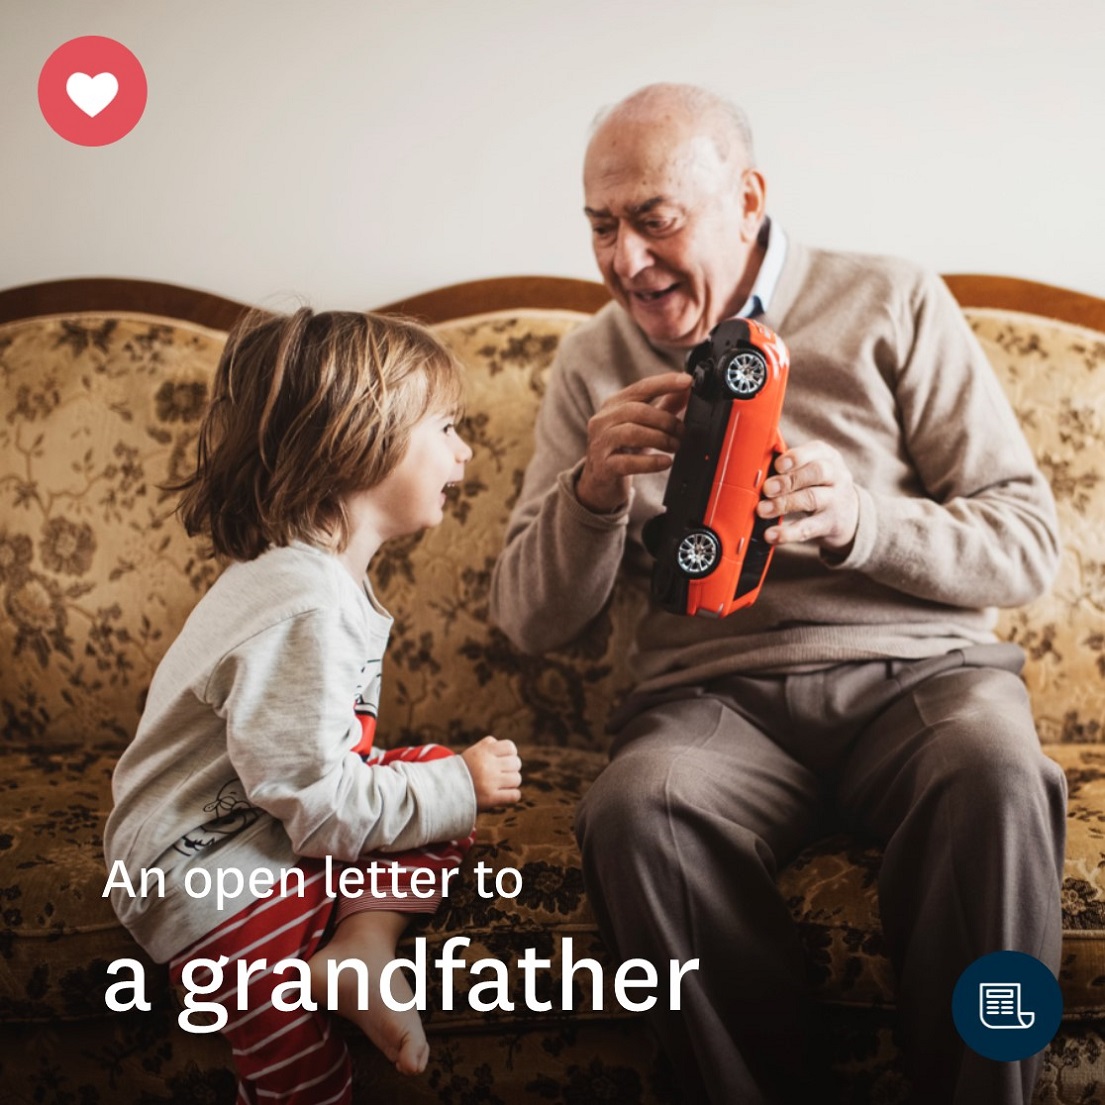 An open letter to a grandad